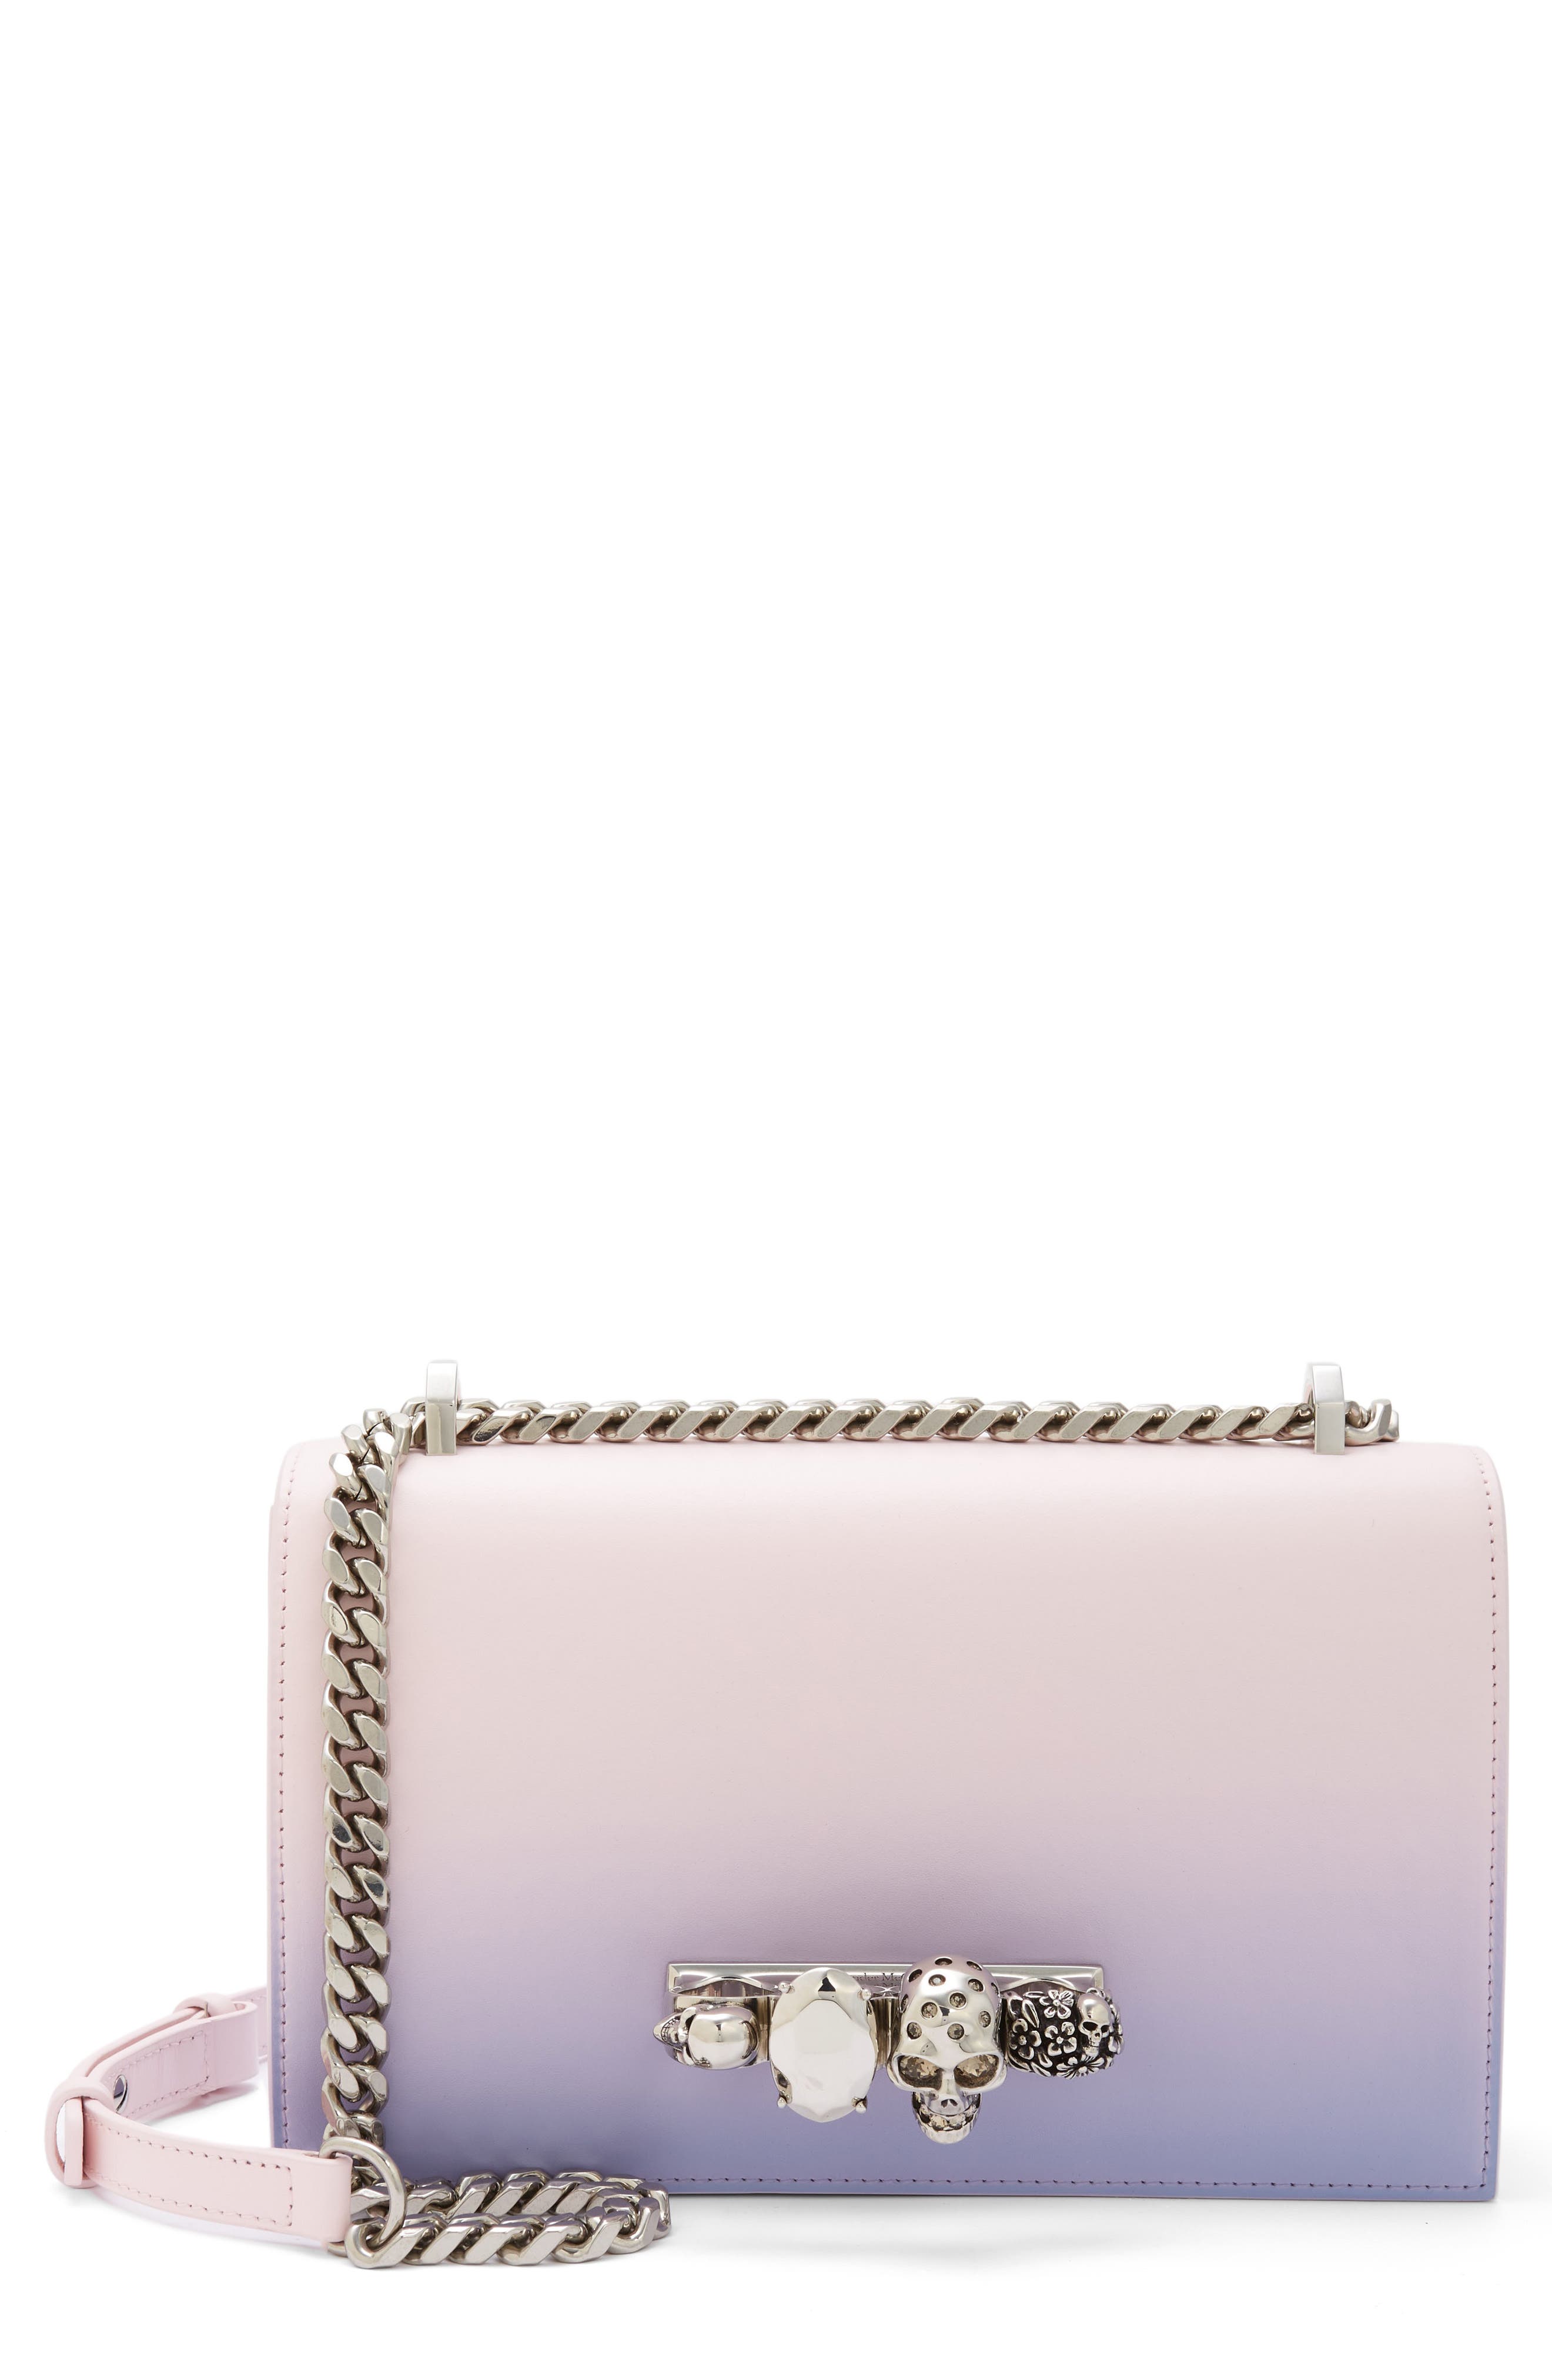 Alexander McQueen Jeweled Ombré Leather Shoulder Bag in 8590 Lilac Multi